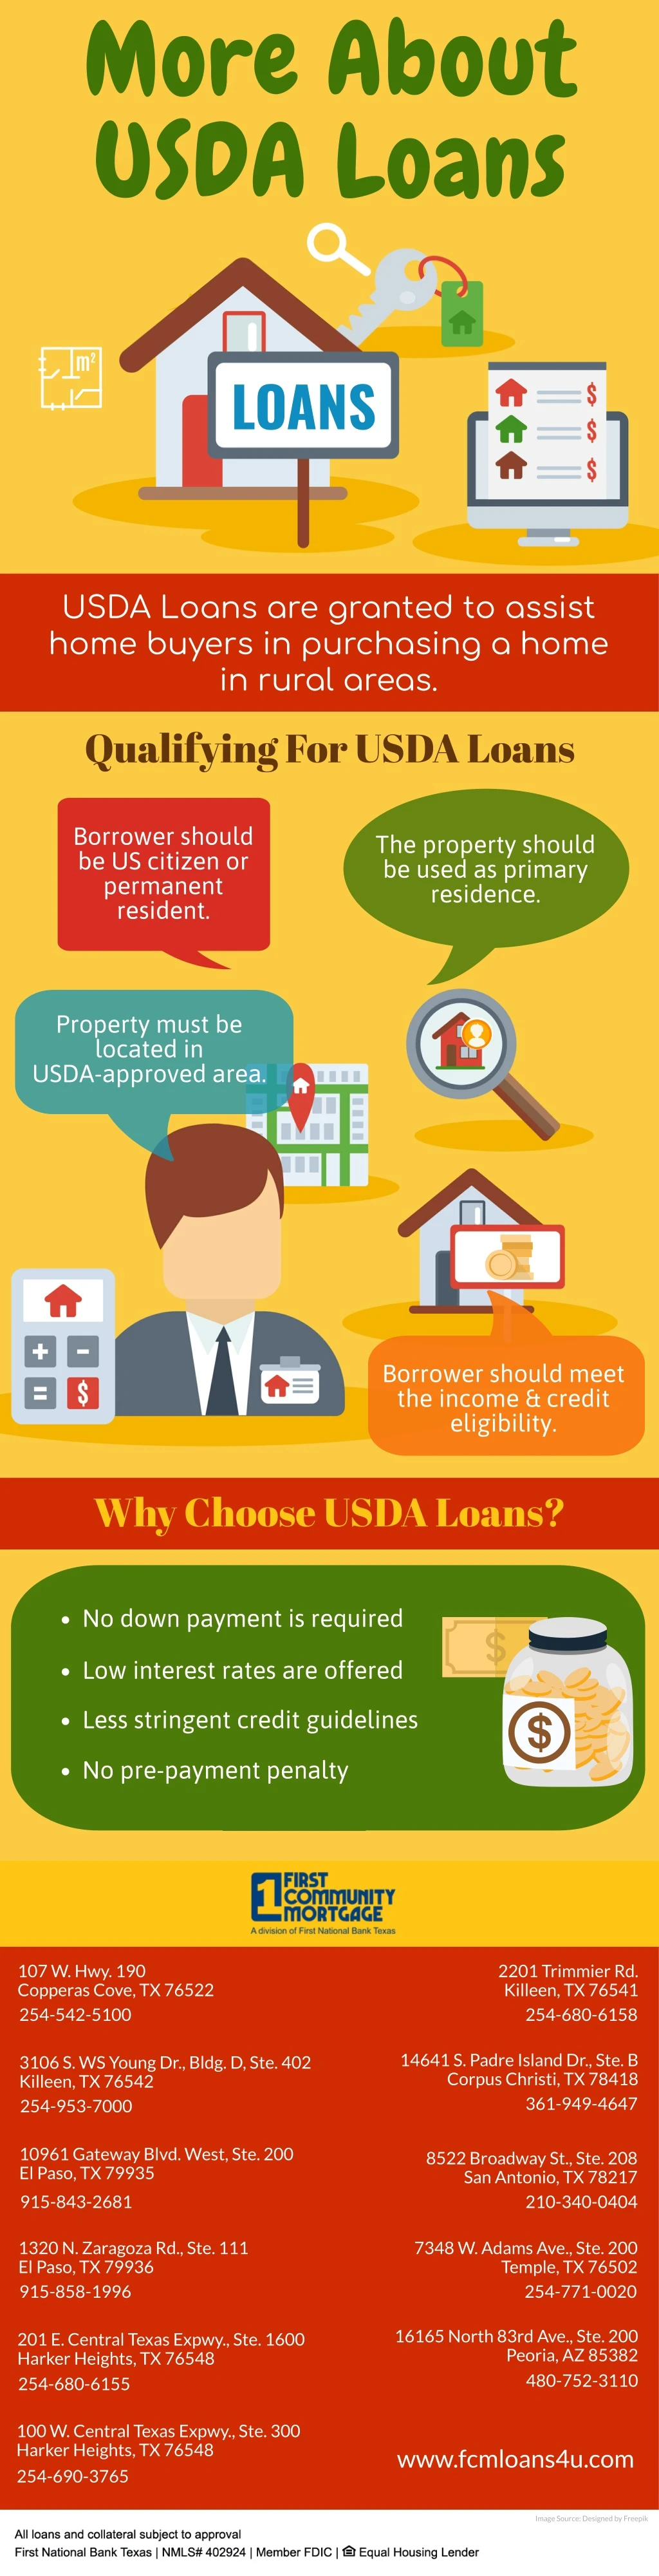 more about usda loans